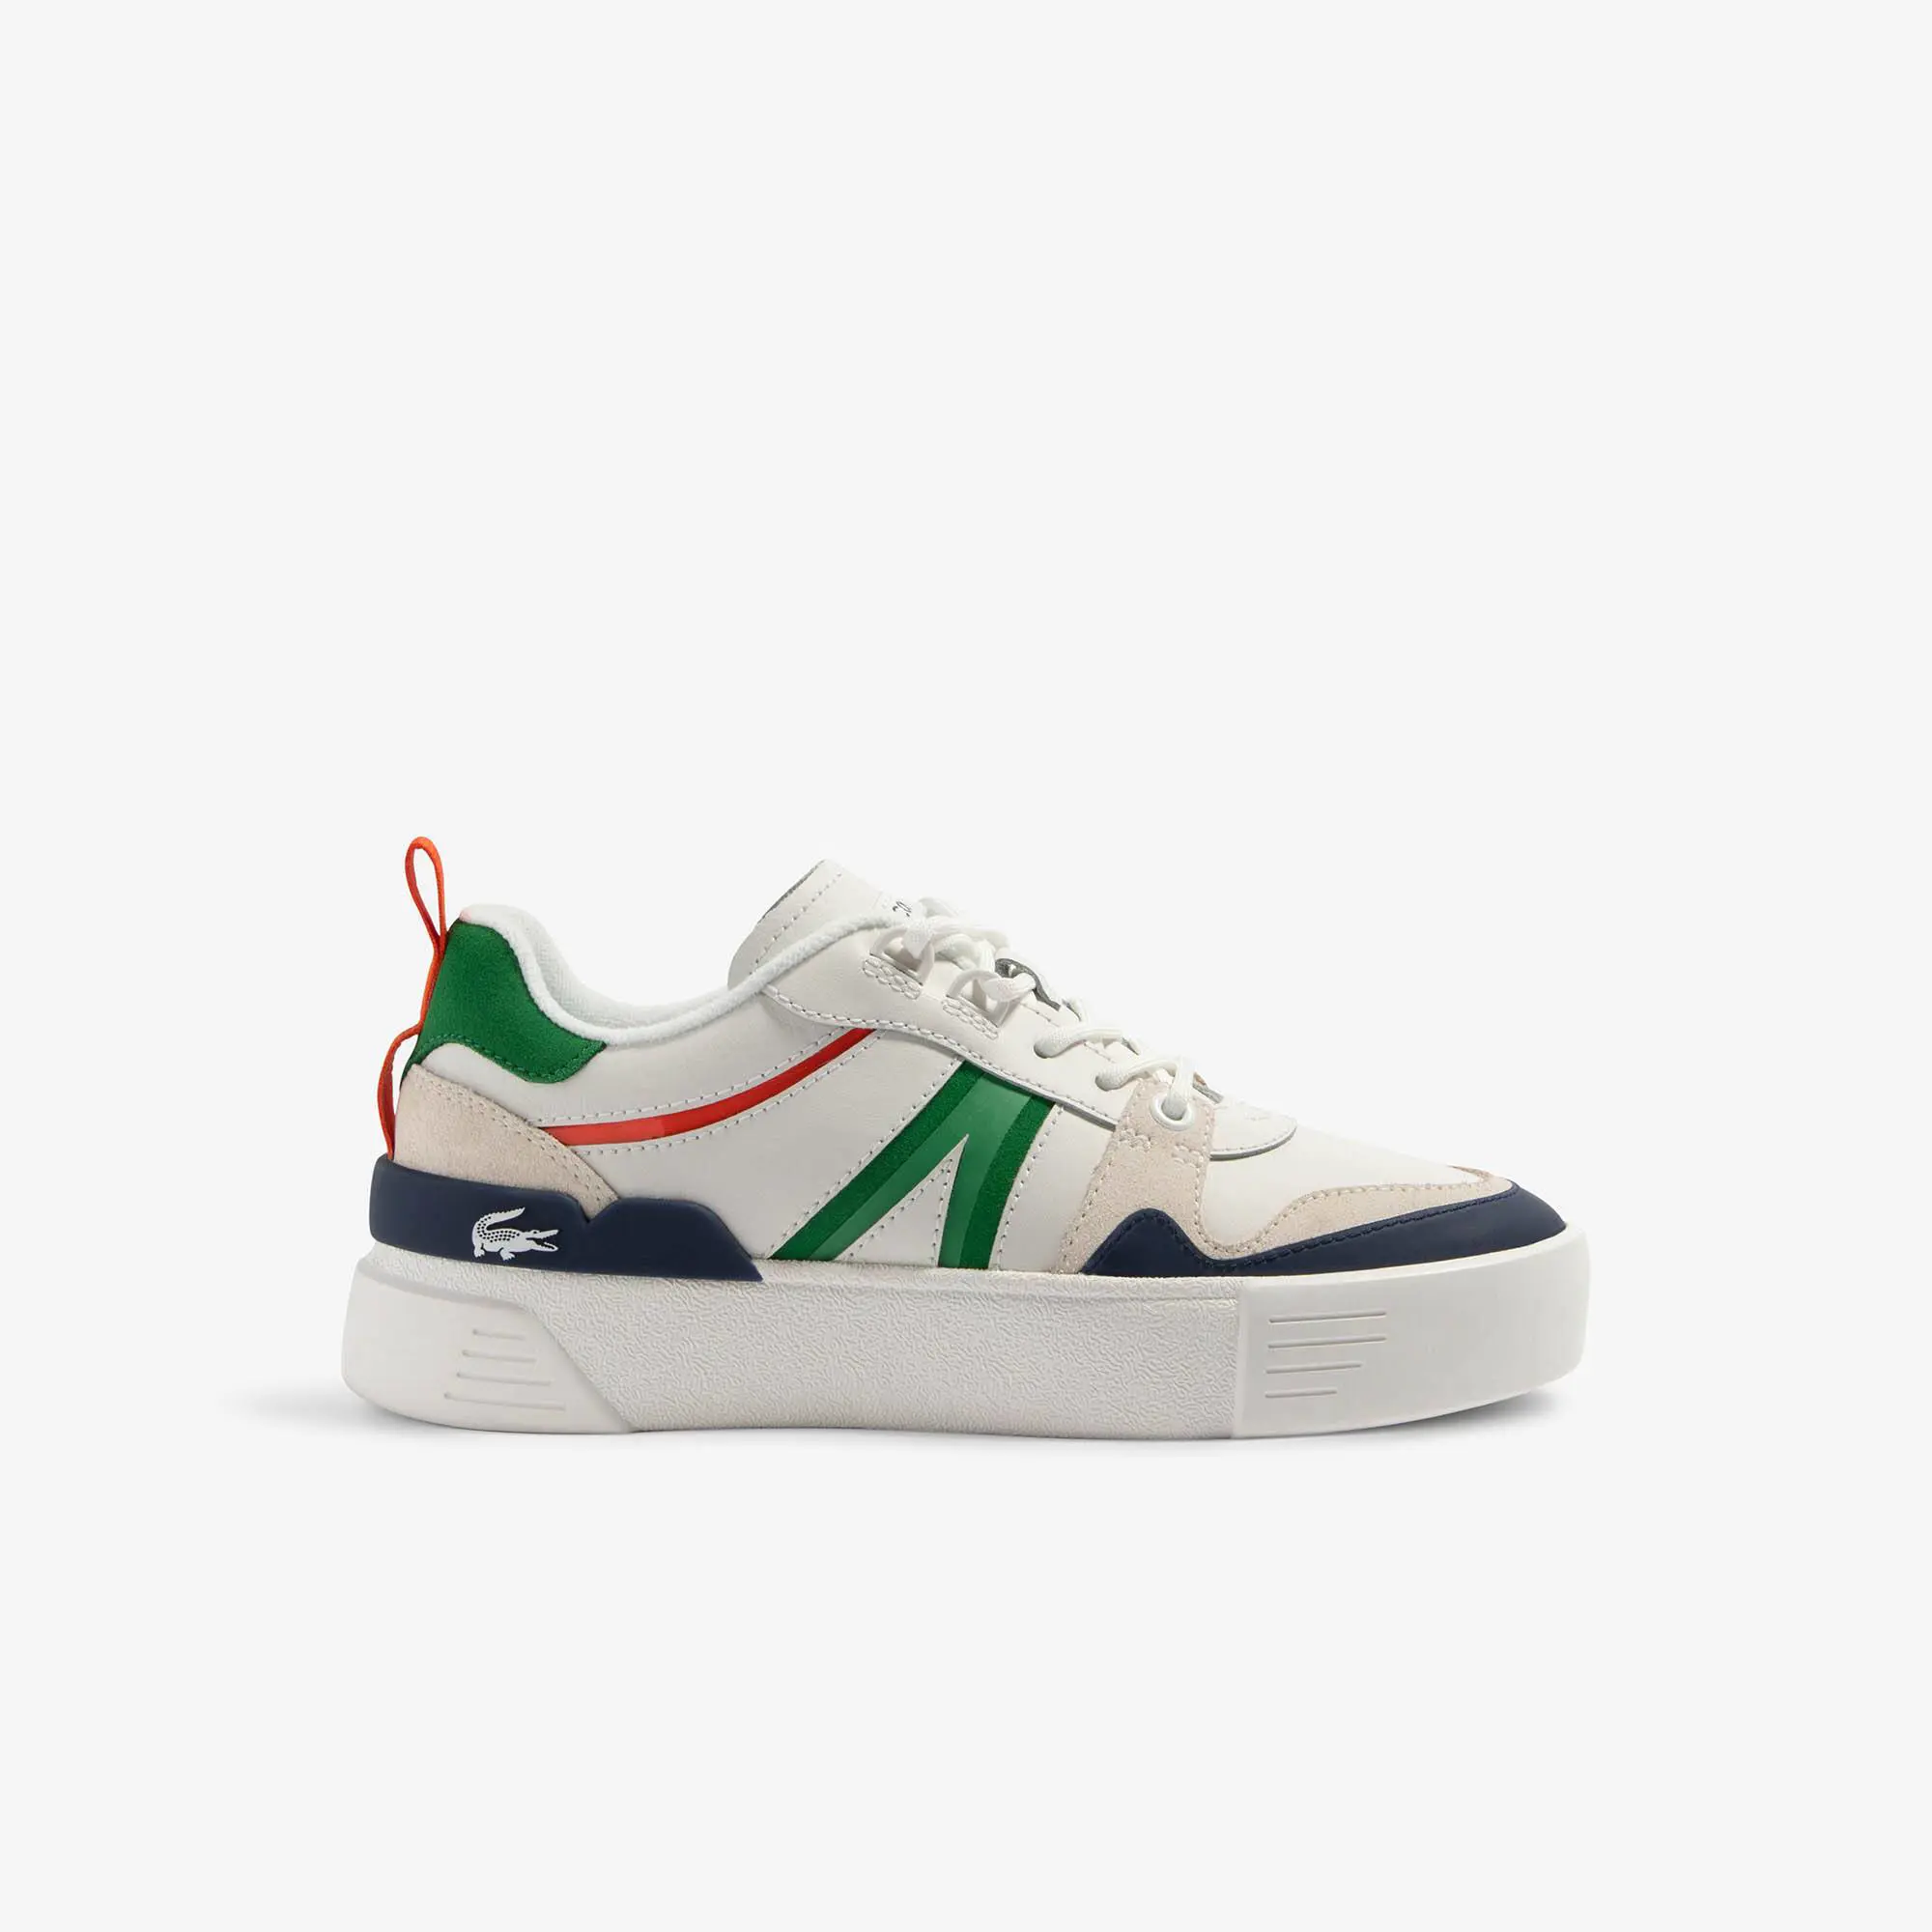 Lacoste Women’s L002 Leather and Mesh Sneakers. 1